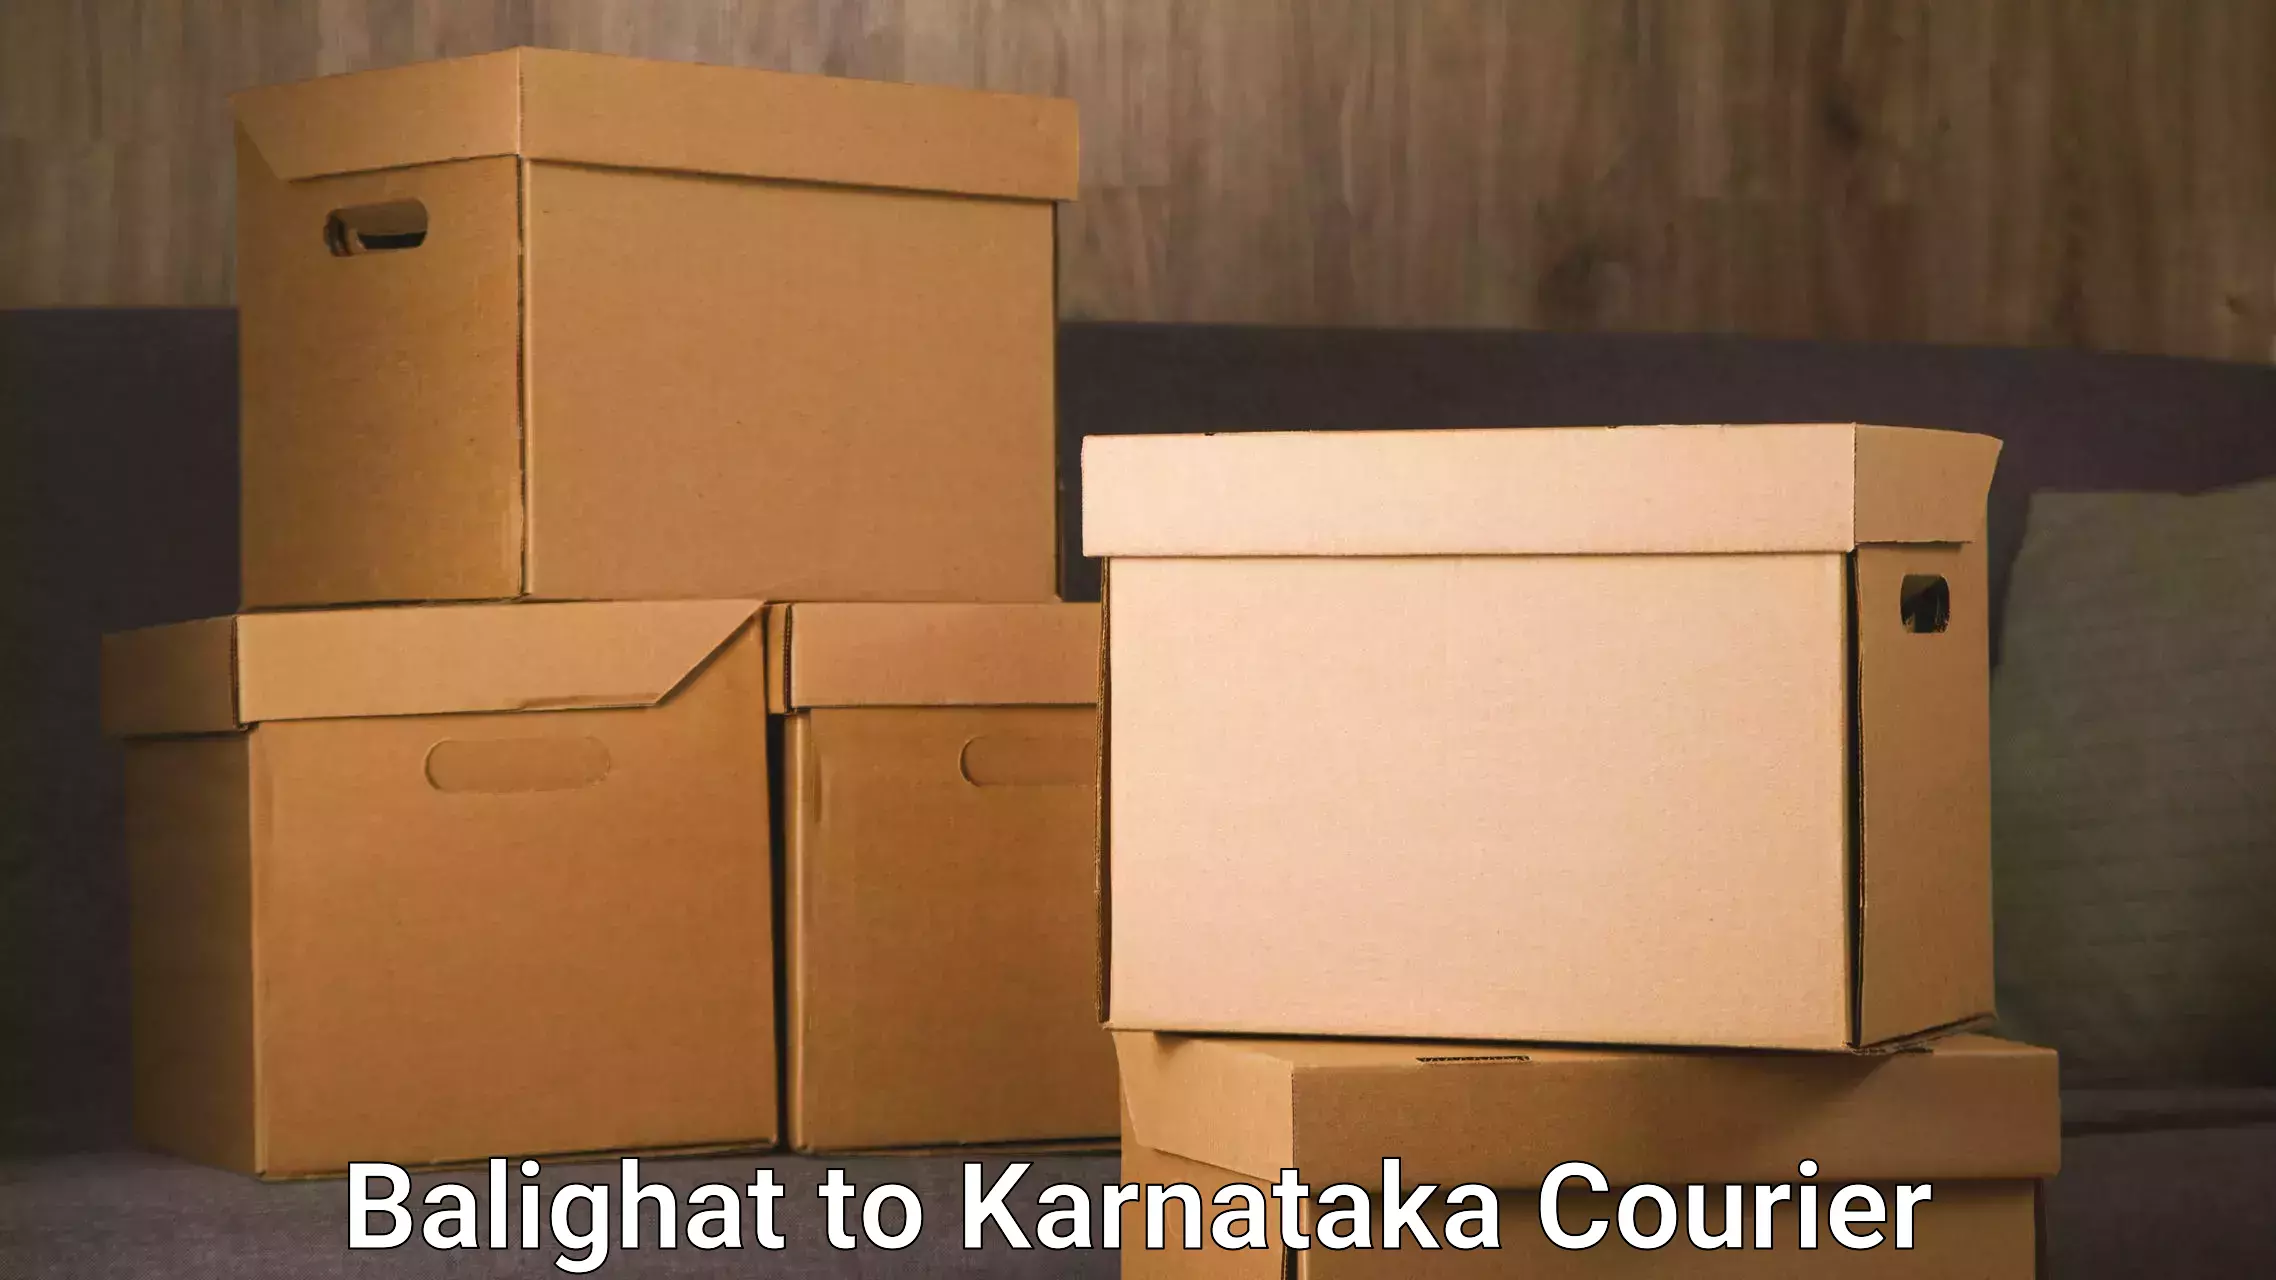 Round-the-clock parcel delivery Balighat to Manipal